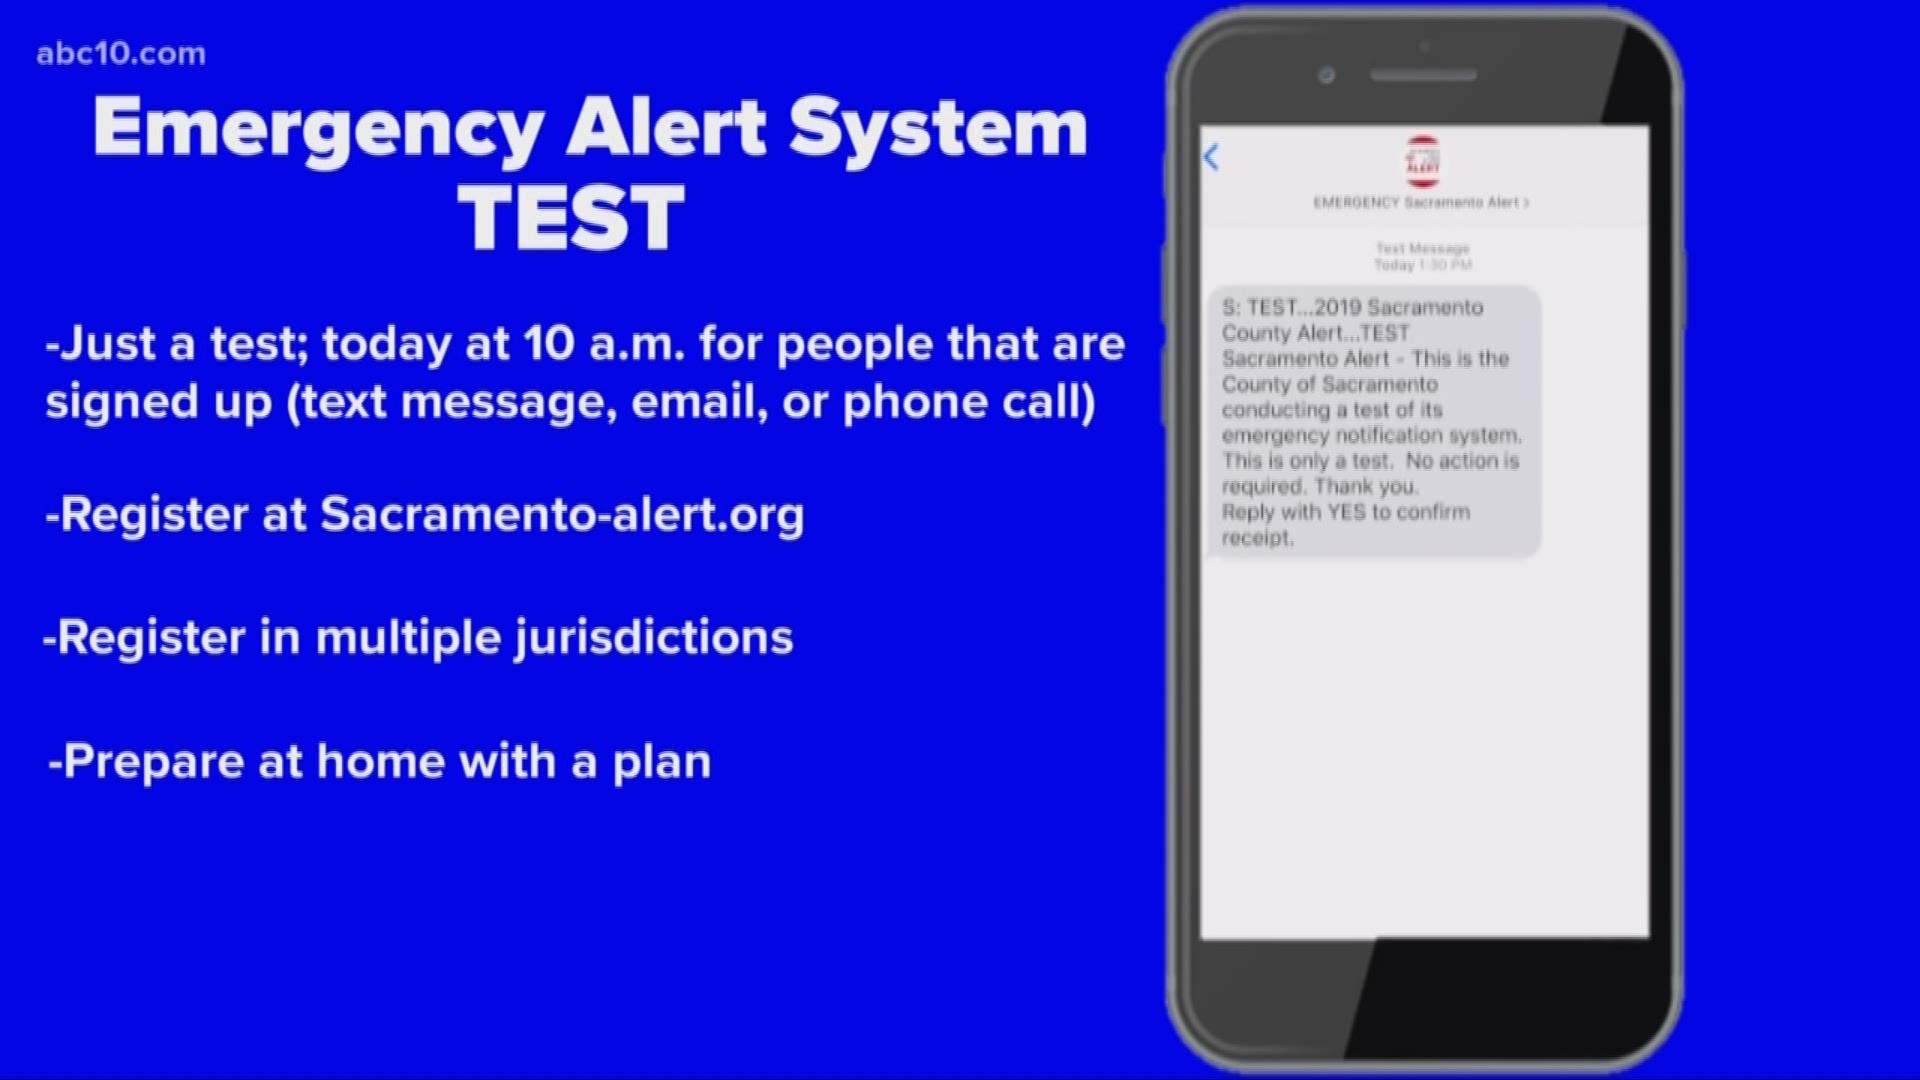 Local, emergency alert system testing happening in Sacramento, Placer